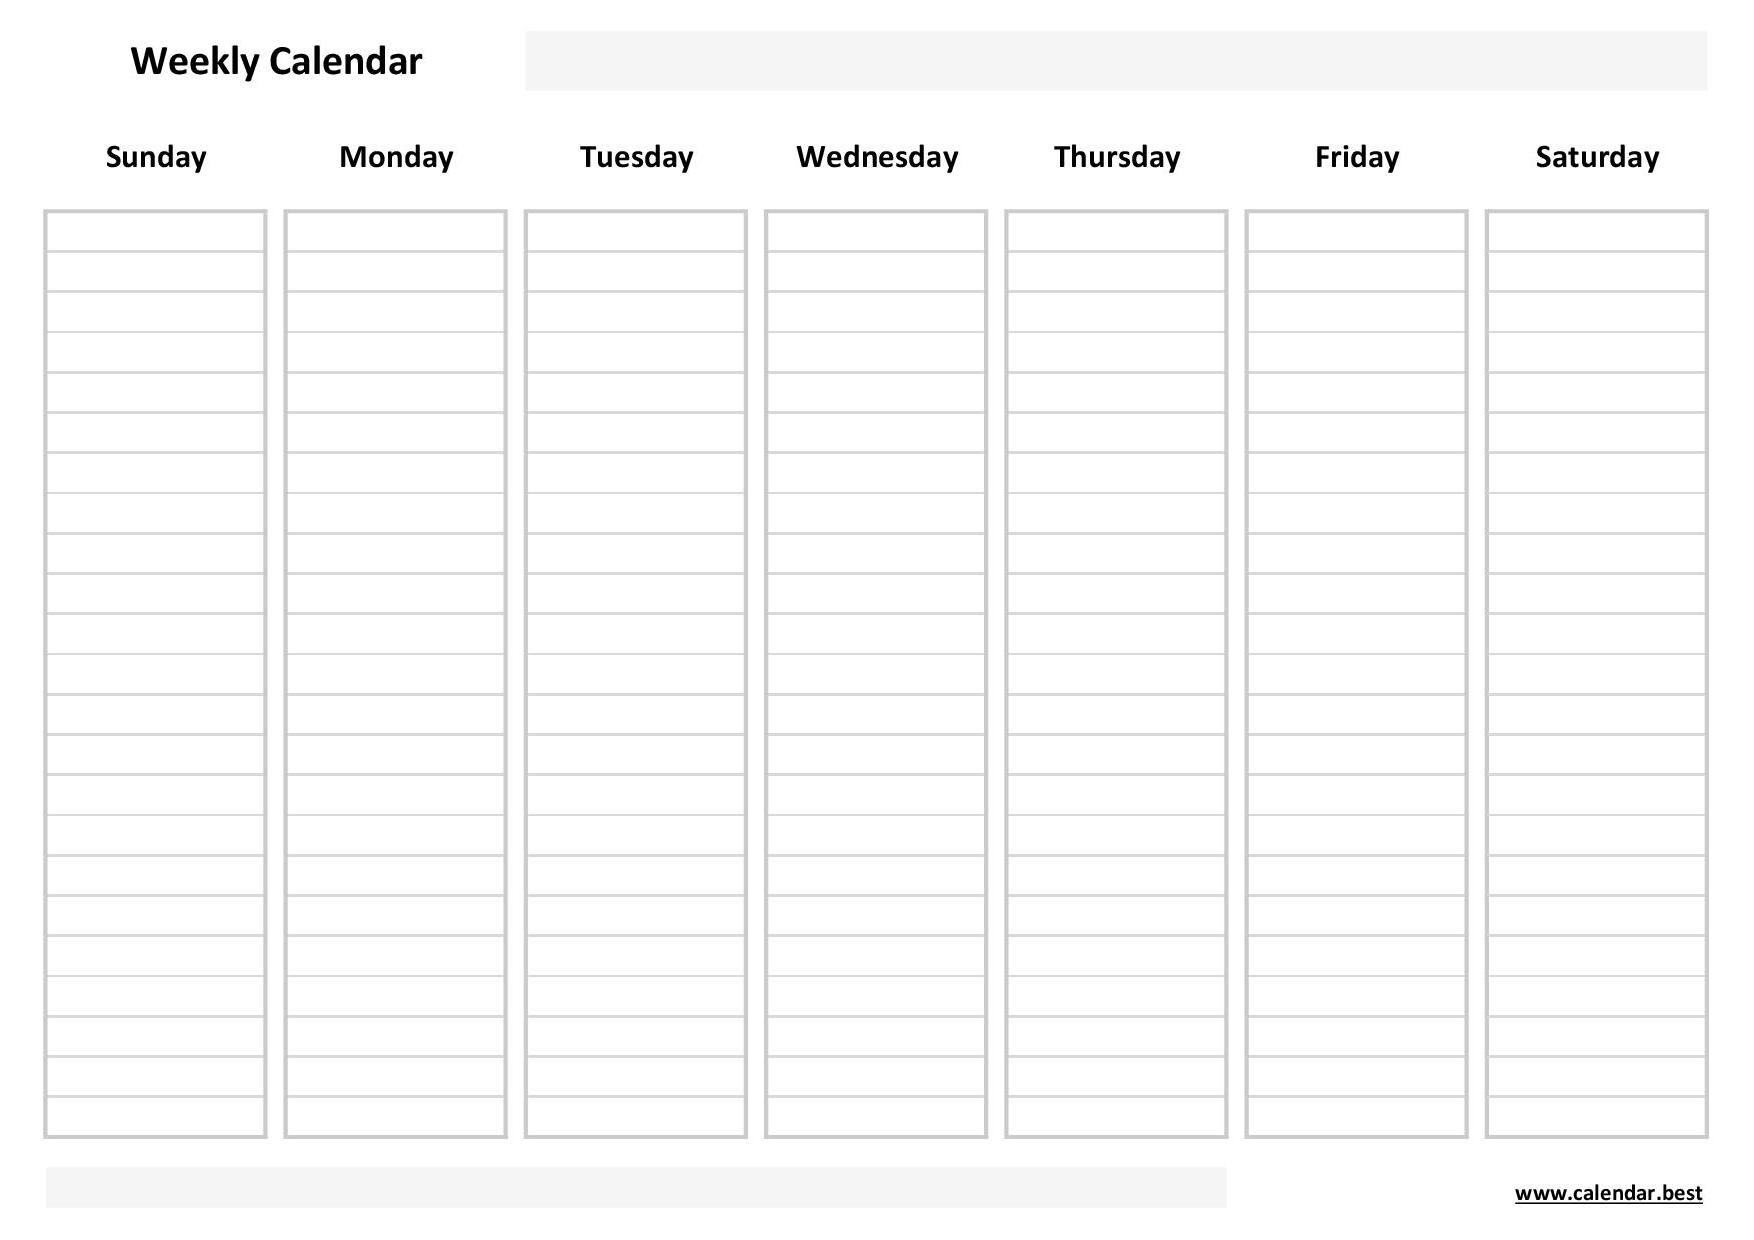 Weekly Calendar Template With Time Slots Google Search